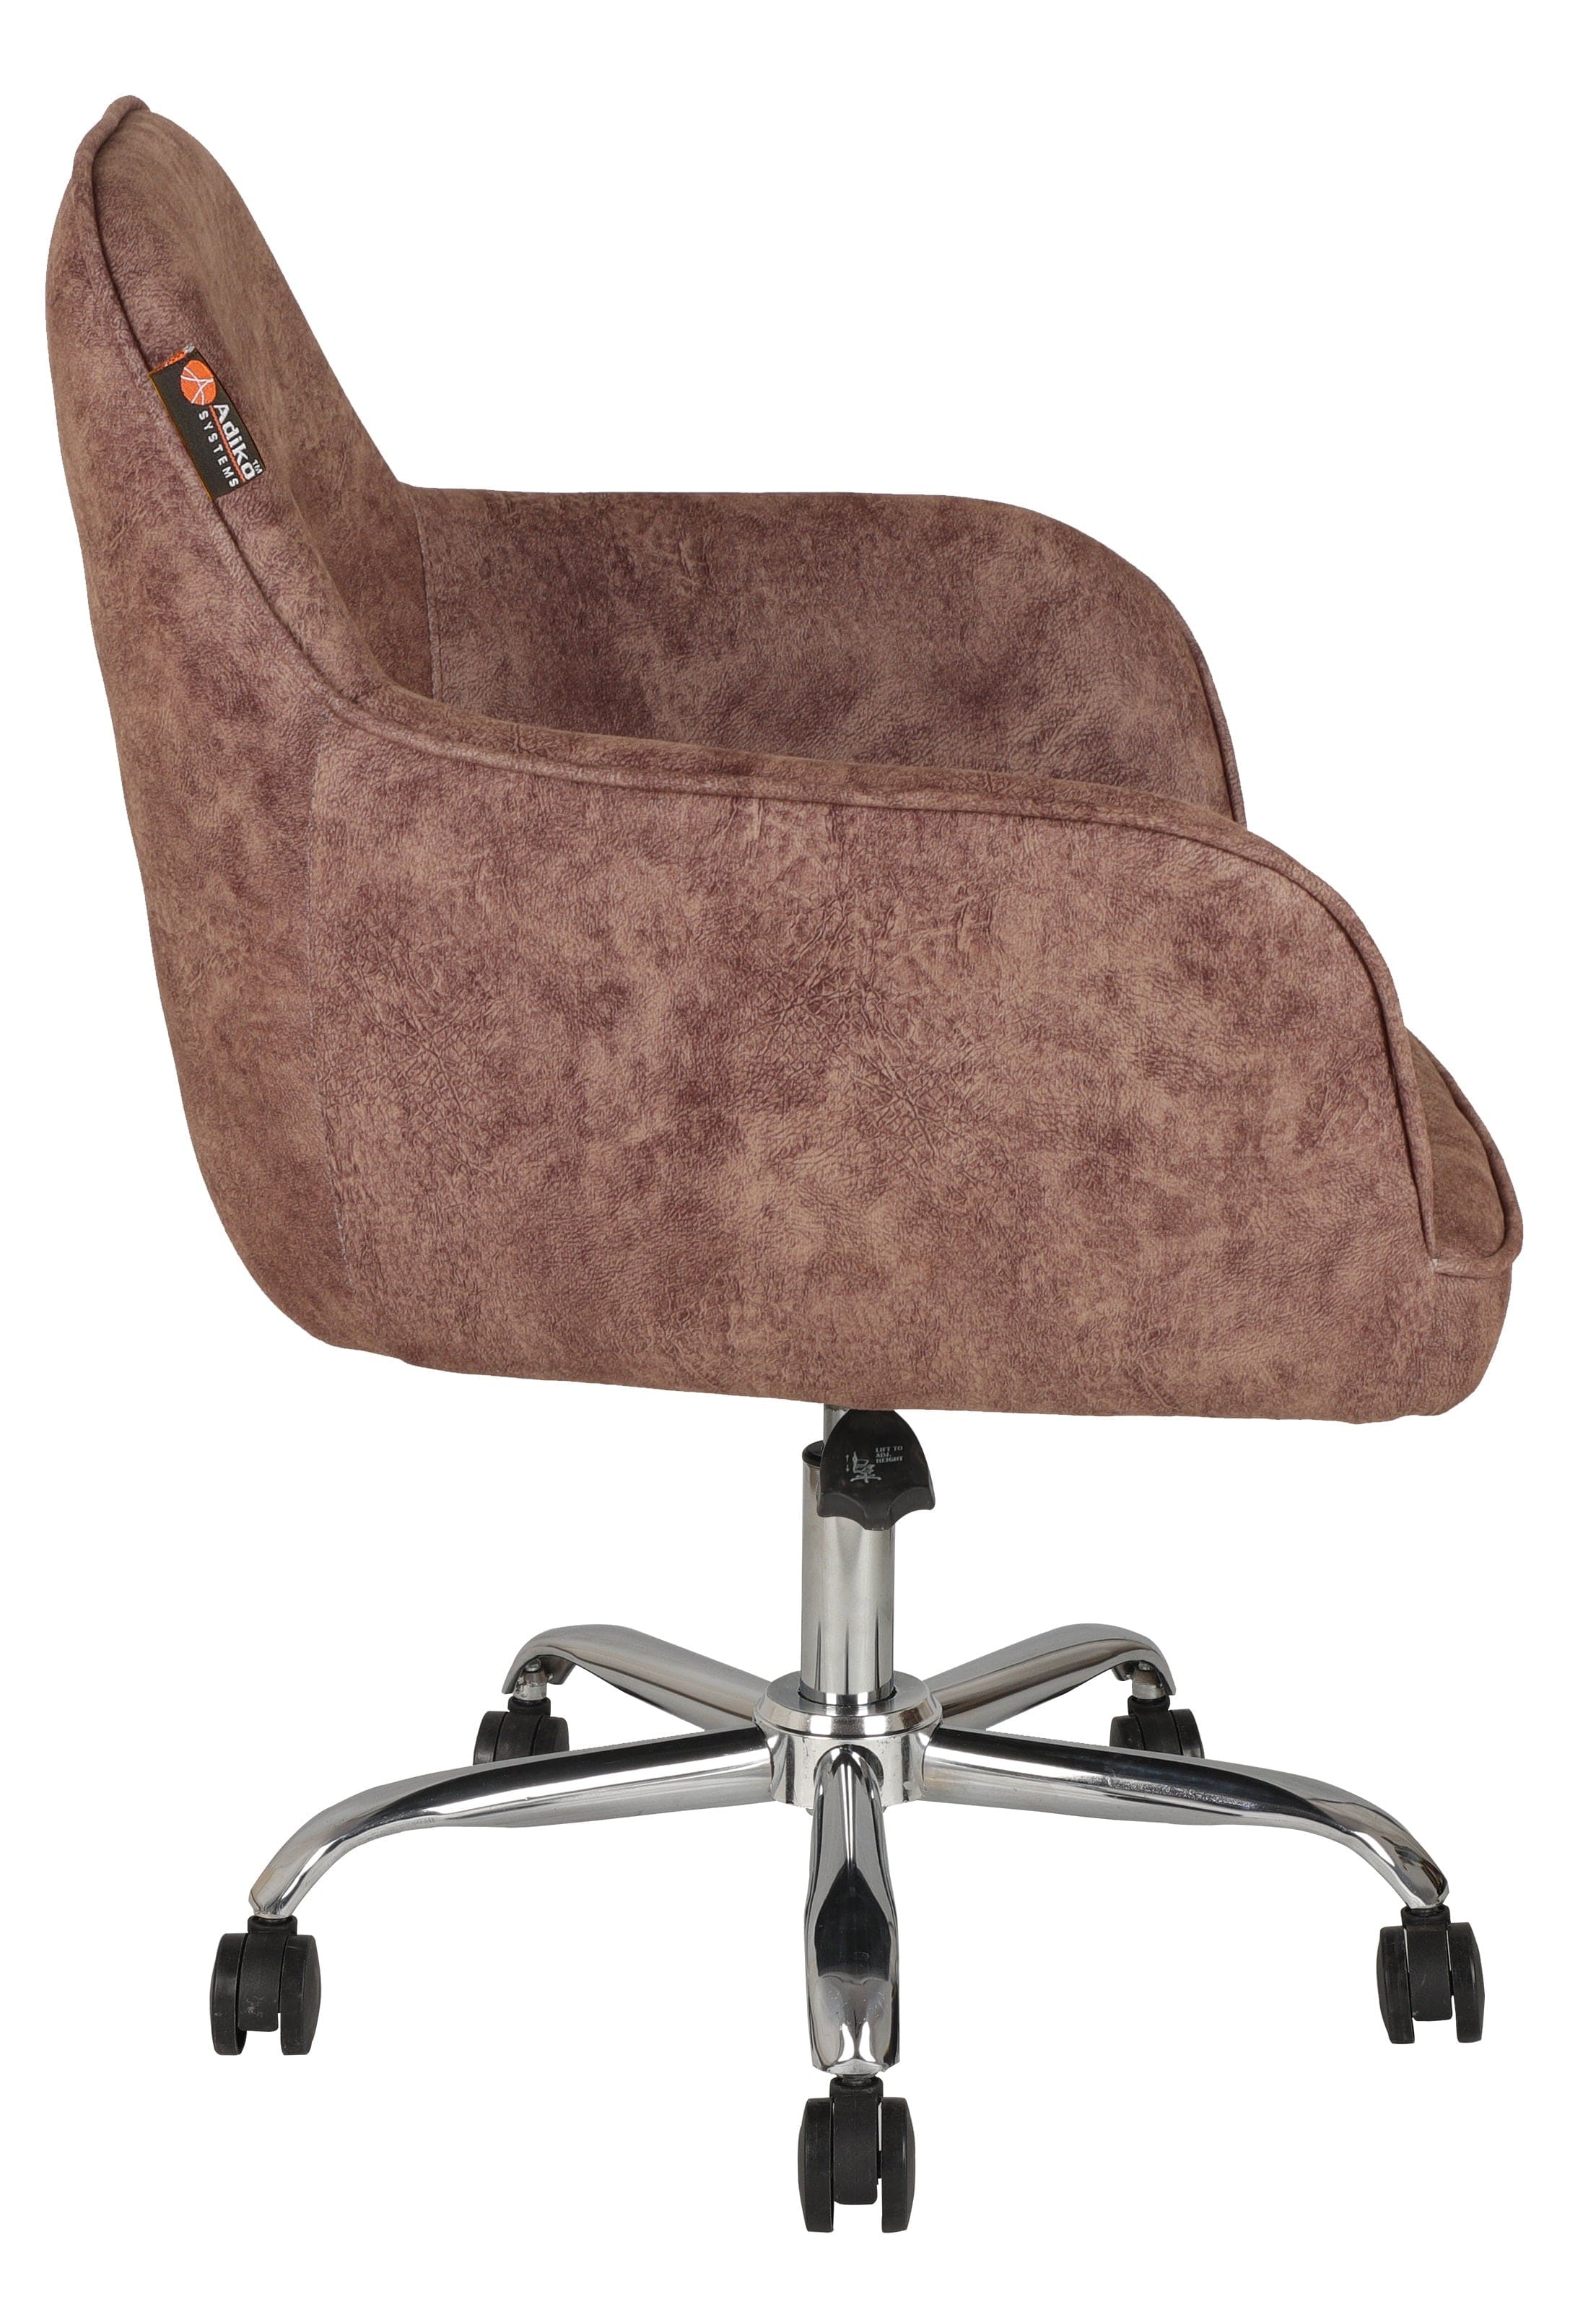 Adiko Lounge Chair in Brown Color